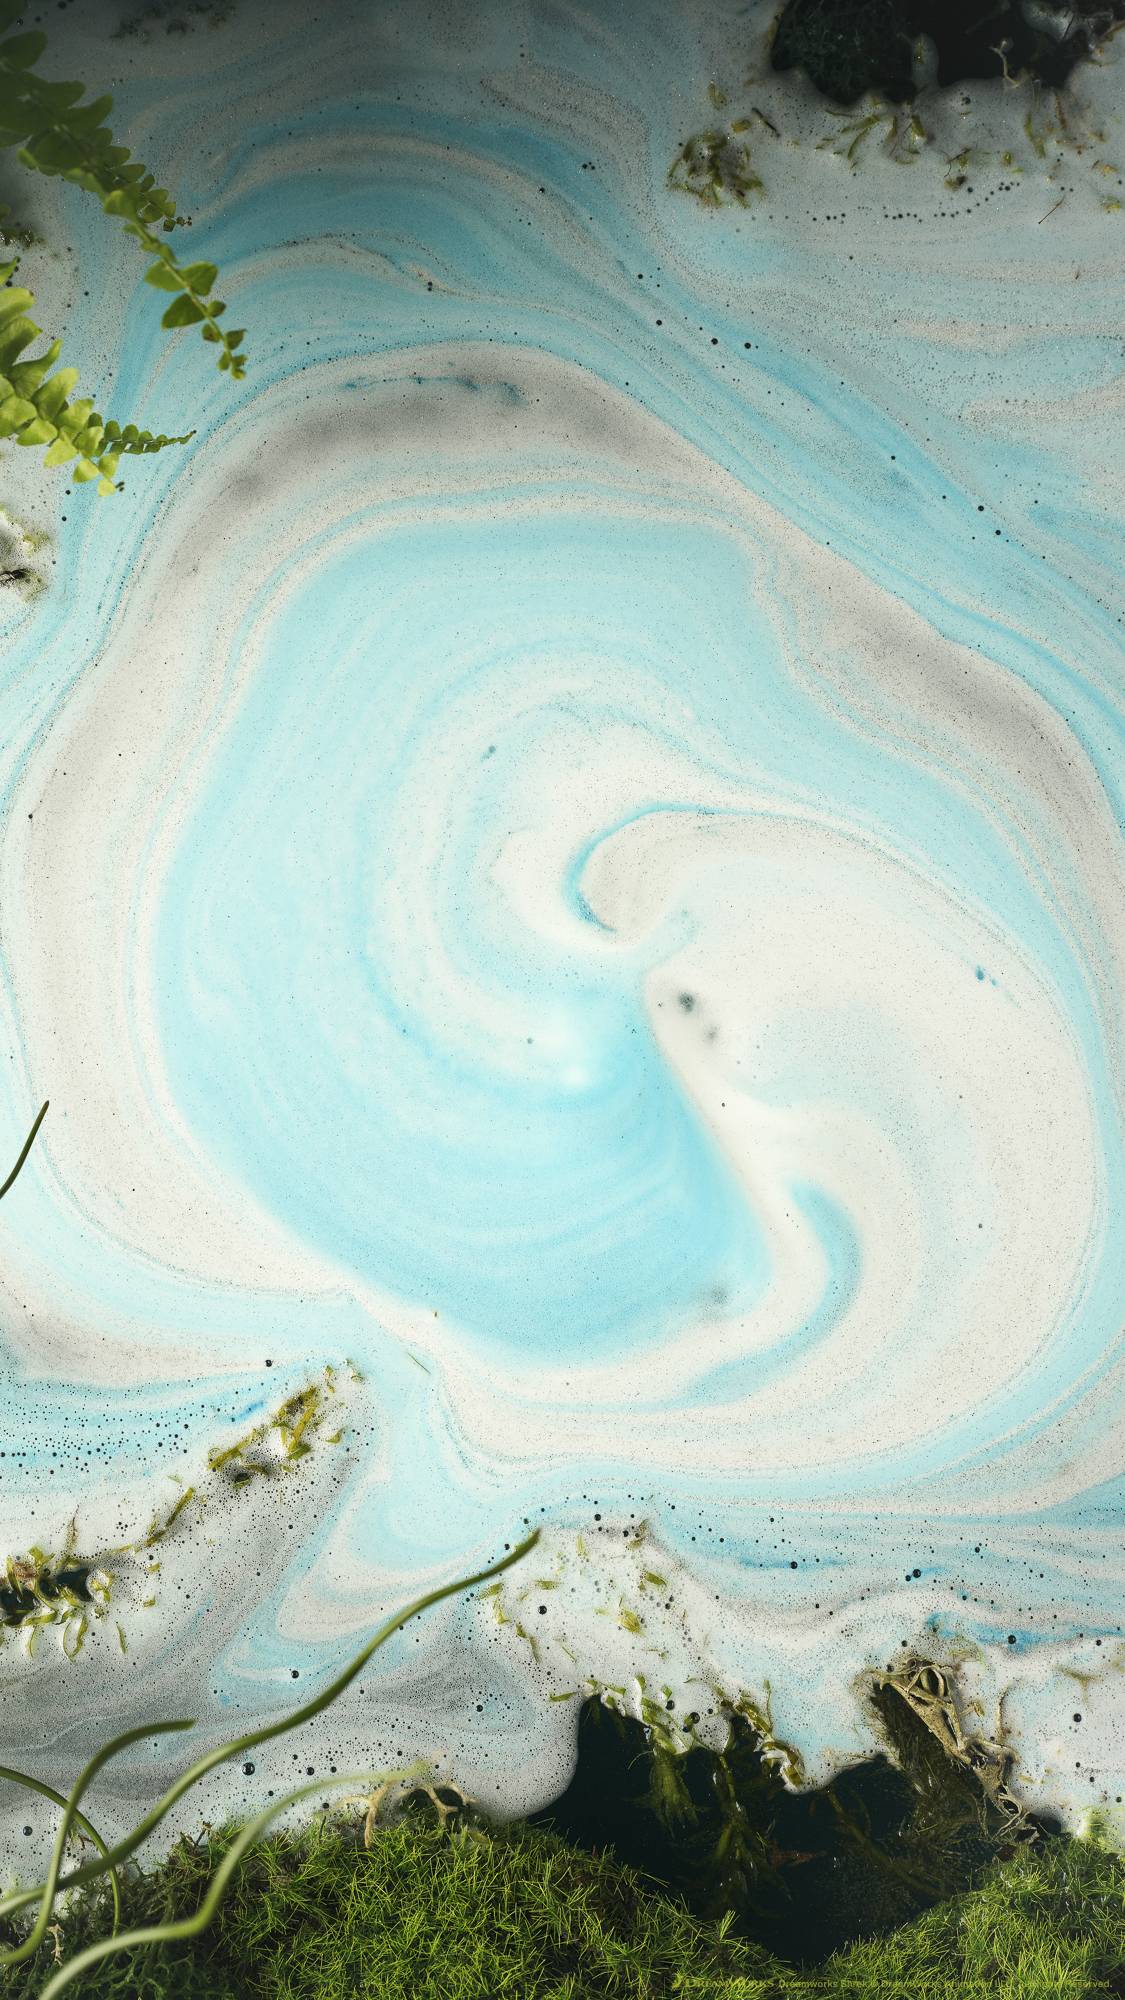 The Donkey bath bomb has fully dissolved leaving behind a thick, velvety blanket of electric blue and crisp white foamy waves. Moss and foliage line the borders. 